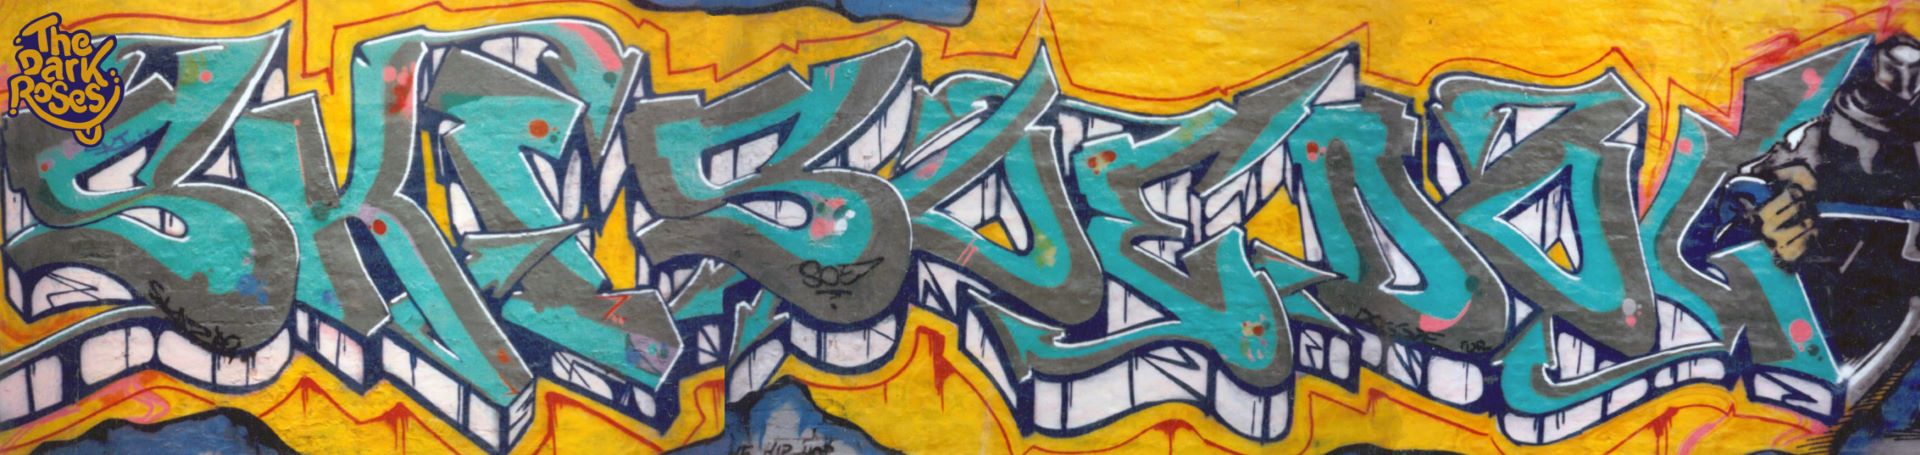 ★ Magnificent Graffiti ★ by DoggieDoe, Dozo by Soe and Sonic by Dj Typhoon - The Dark Roses - Glostrup, Denmark 1988